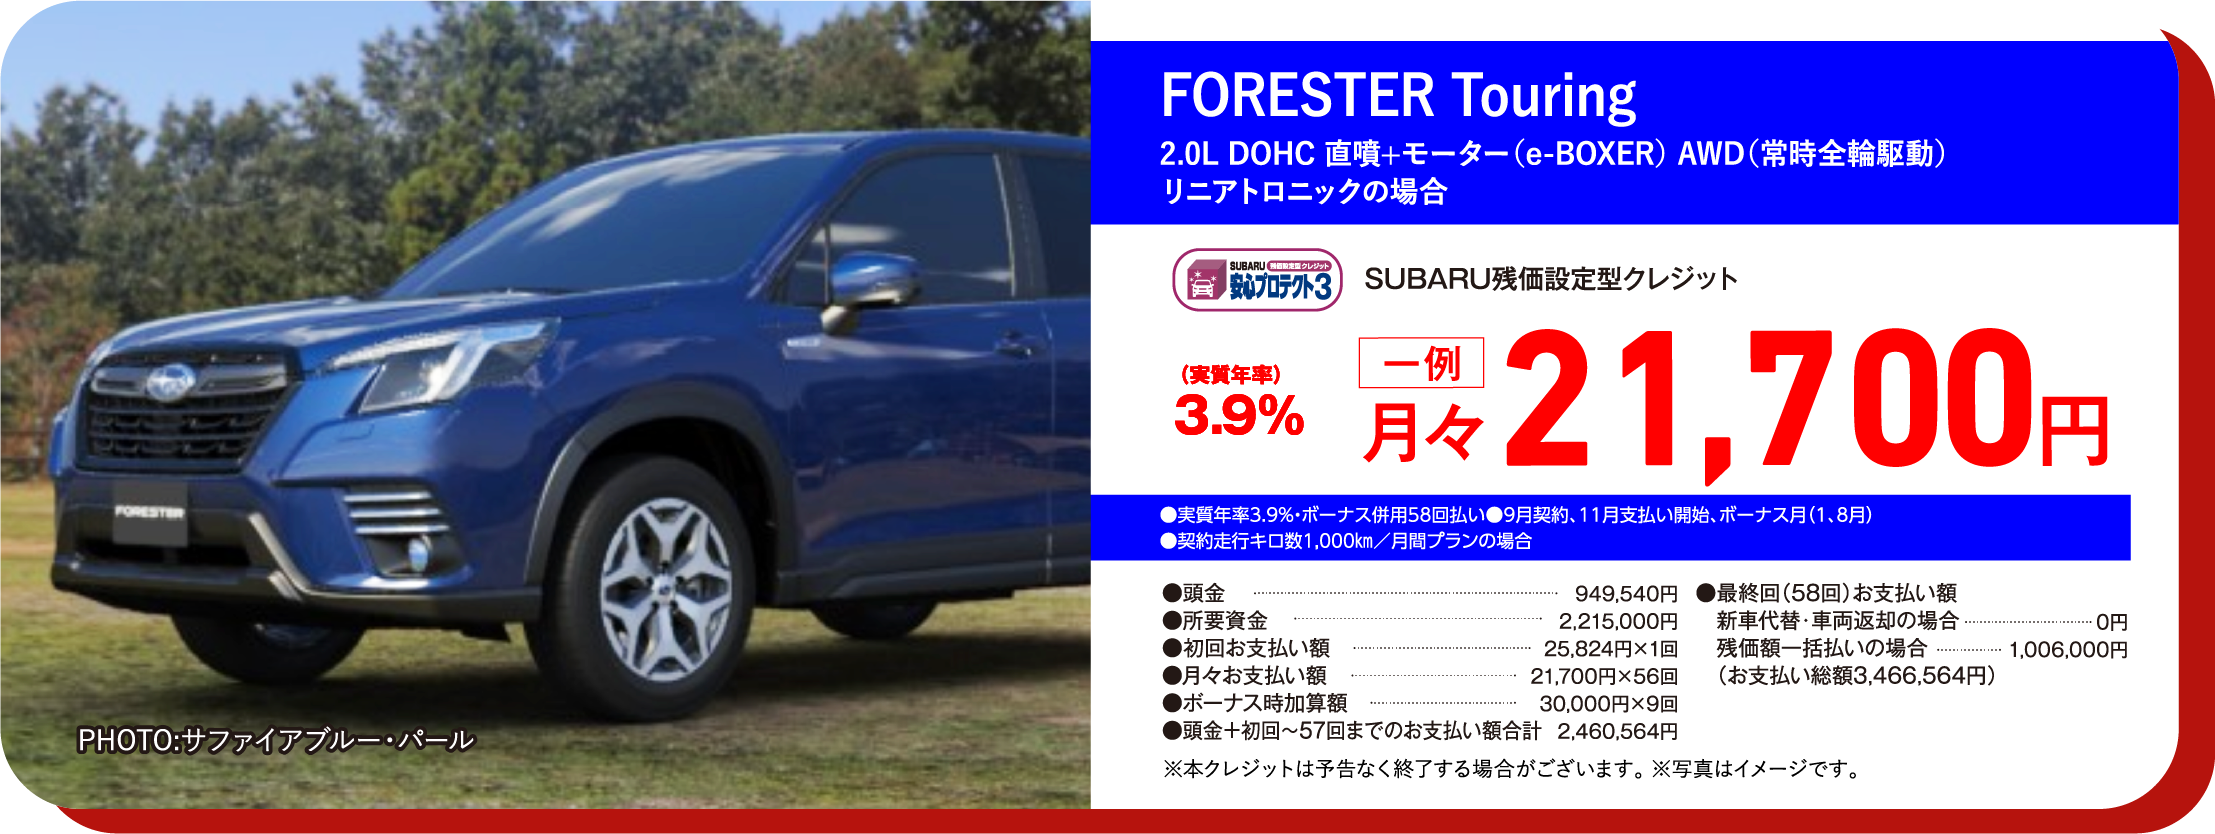 FORESTER Touring